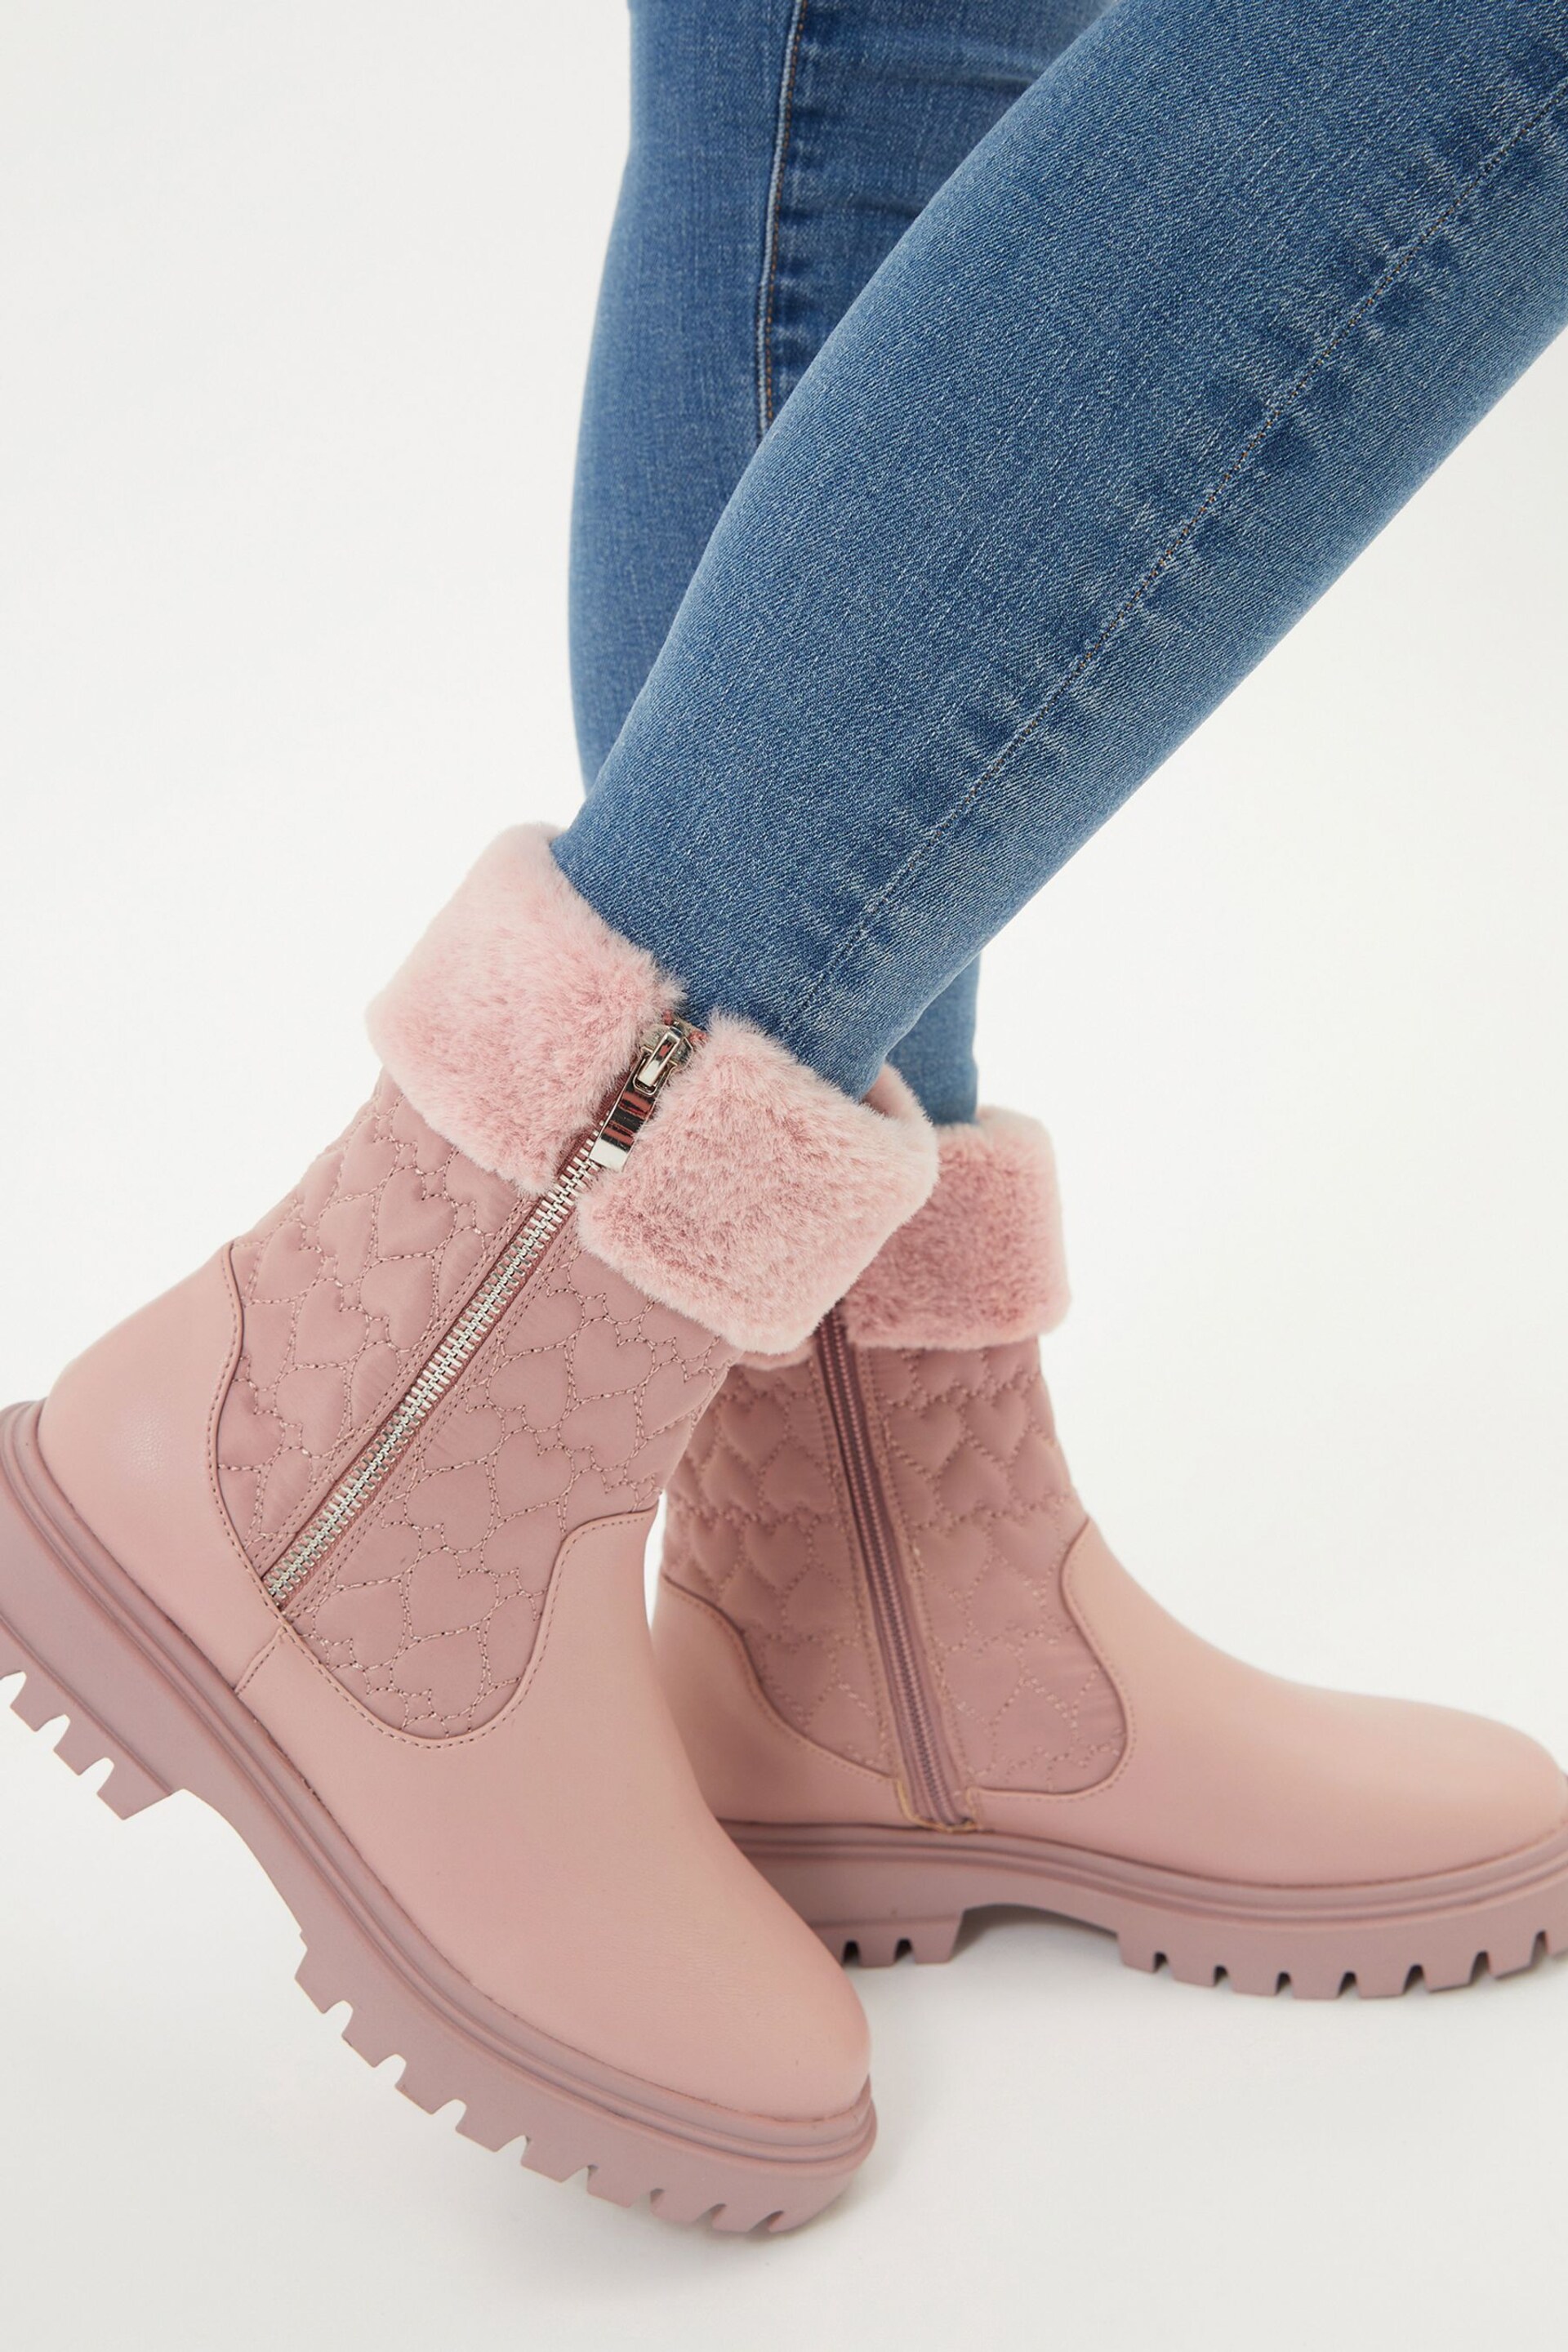 Lipsy Pink Flat Faux Fur Trim Ankle Boot - Image 1 of 3